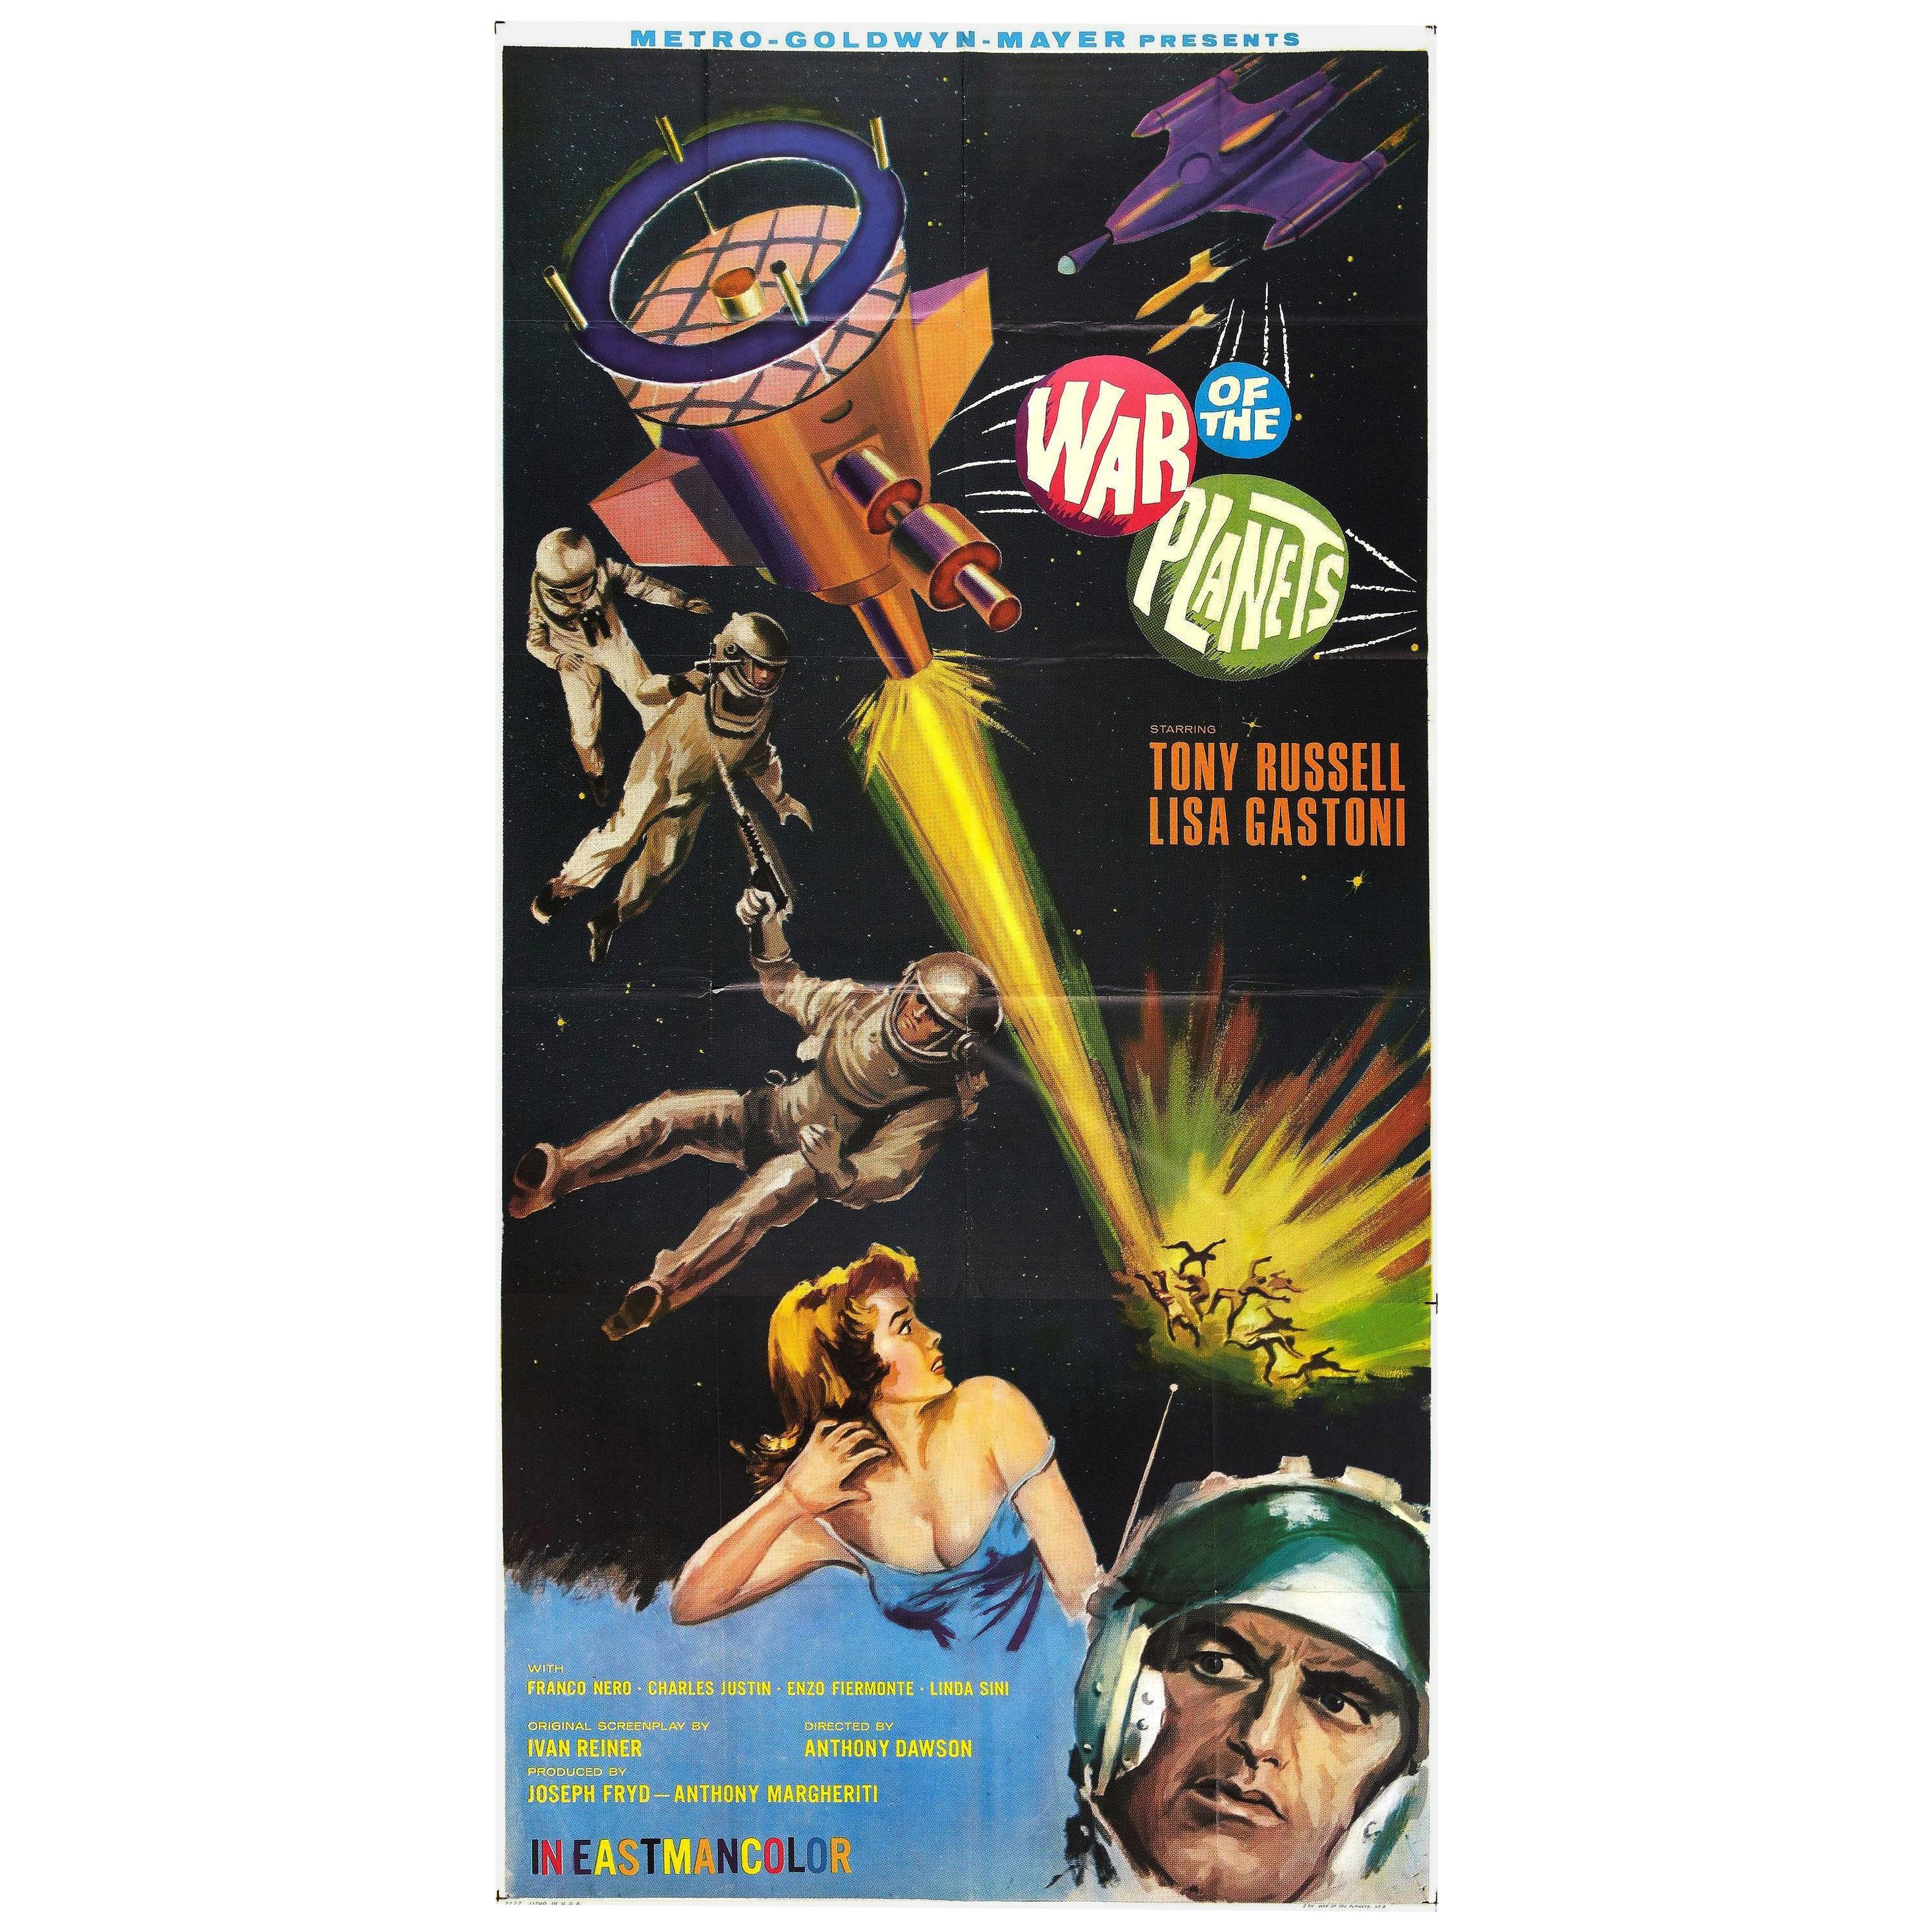 Three Sheet Original "The War of The Planets" Movie Poster For Sale